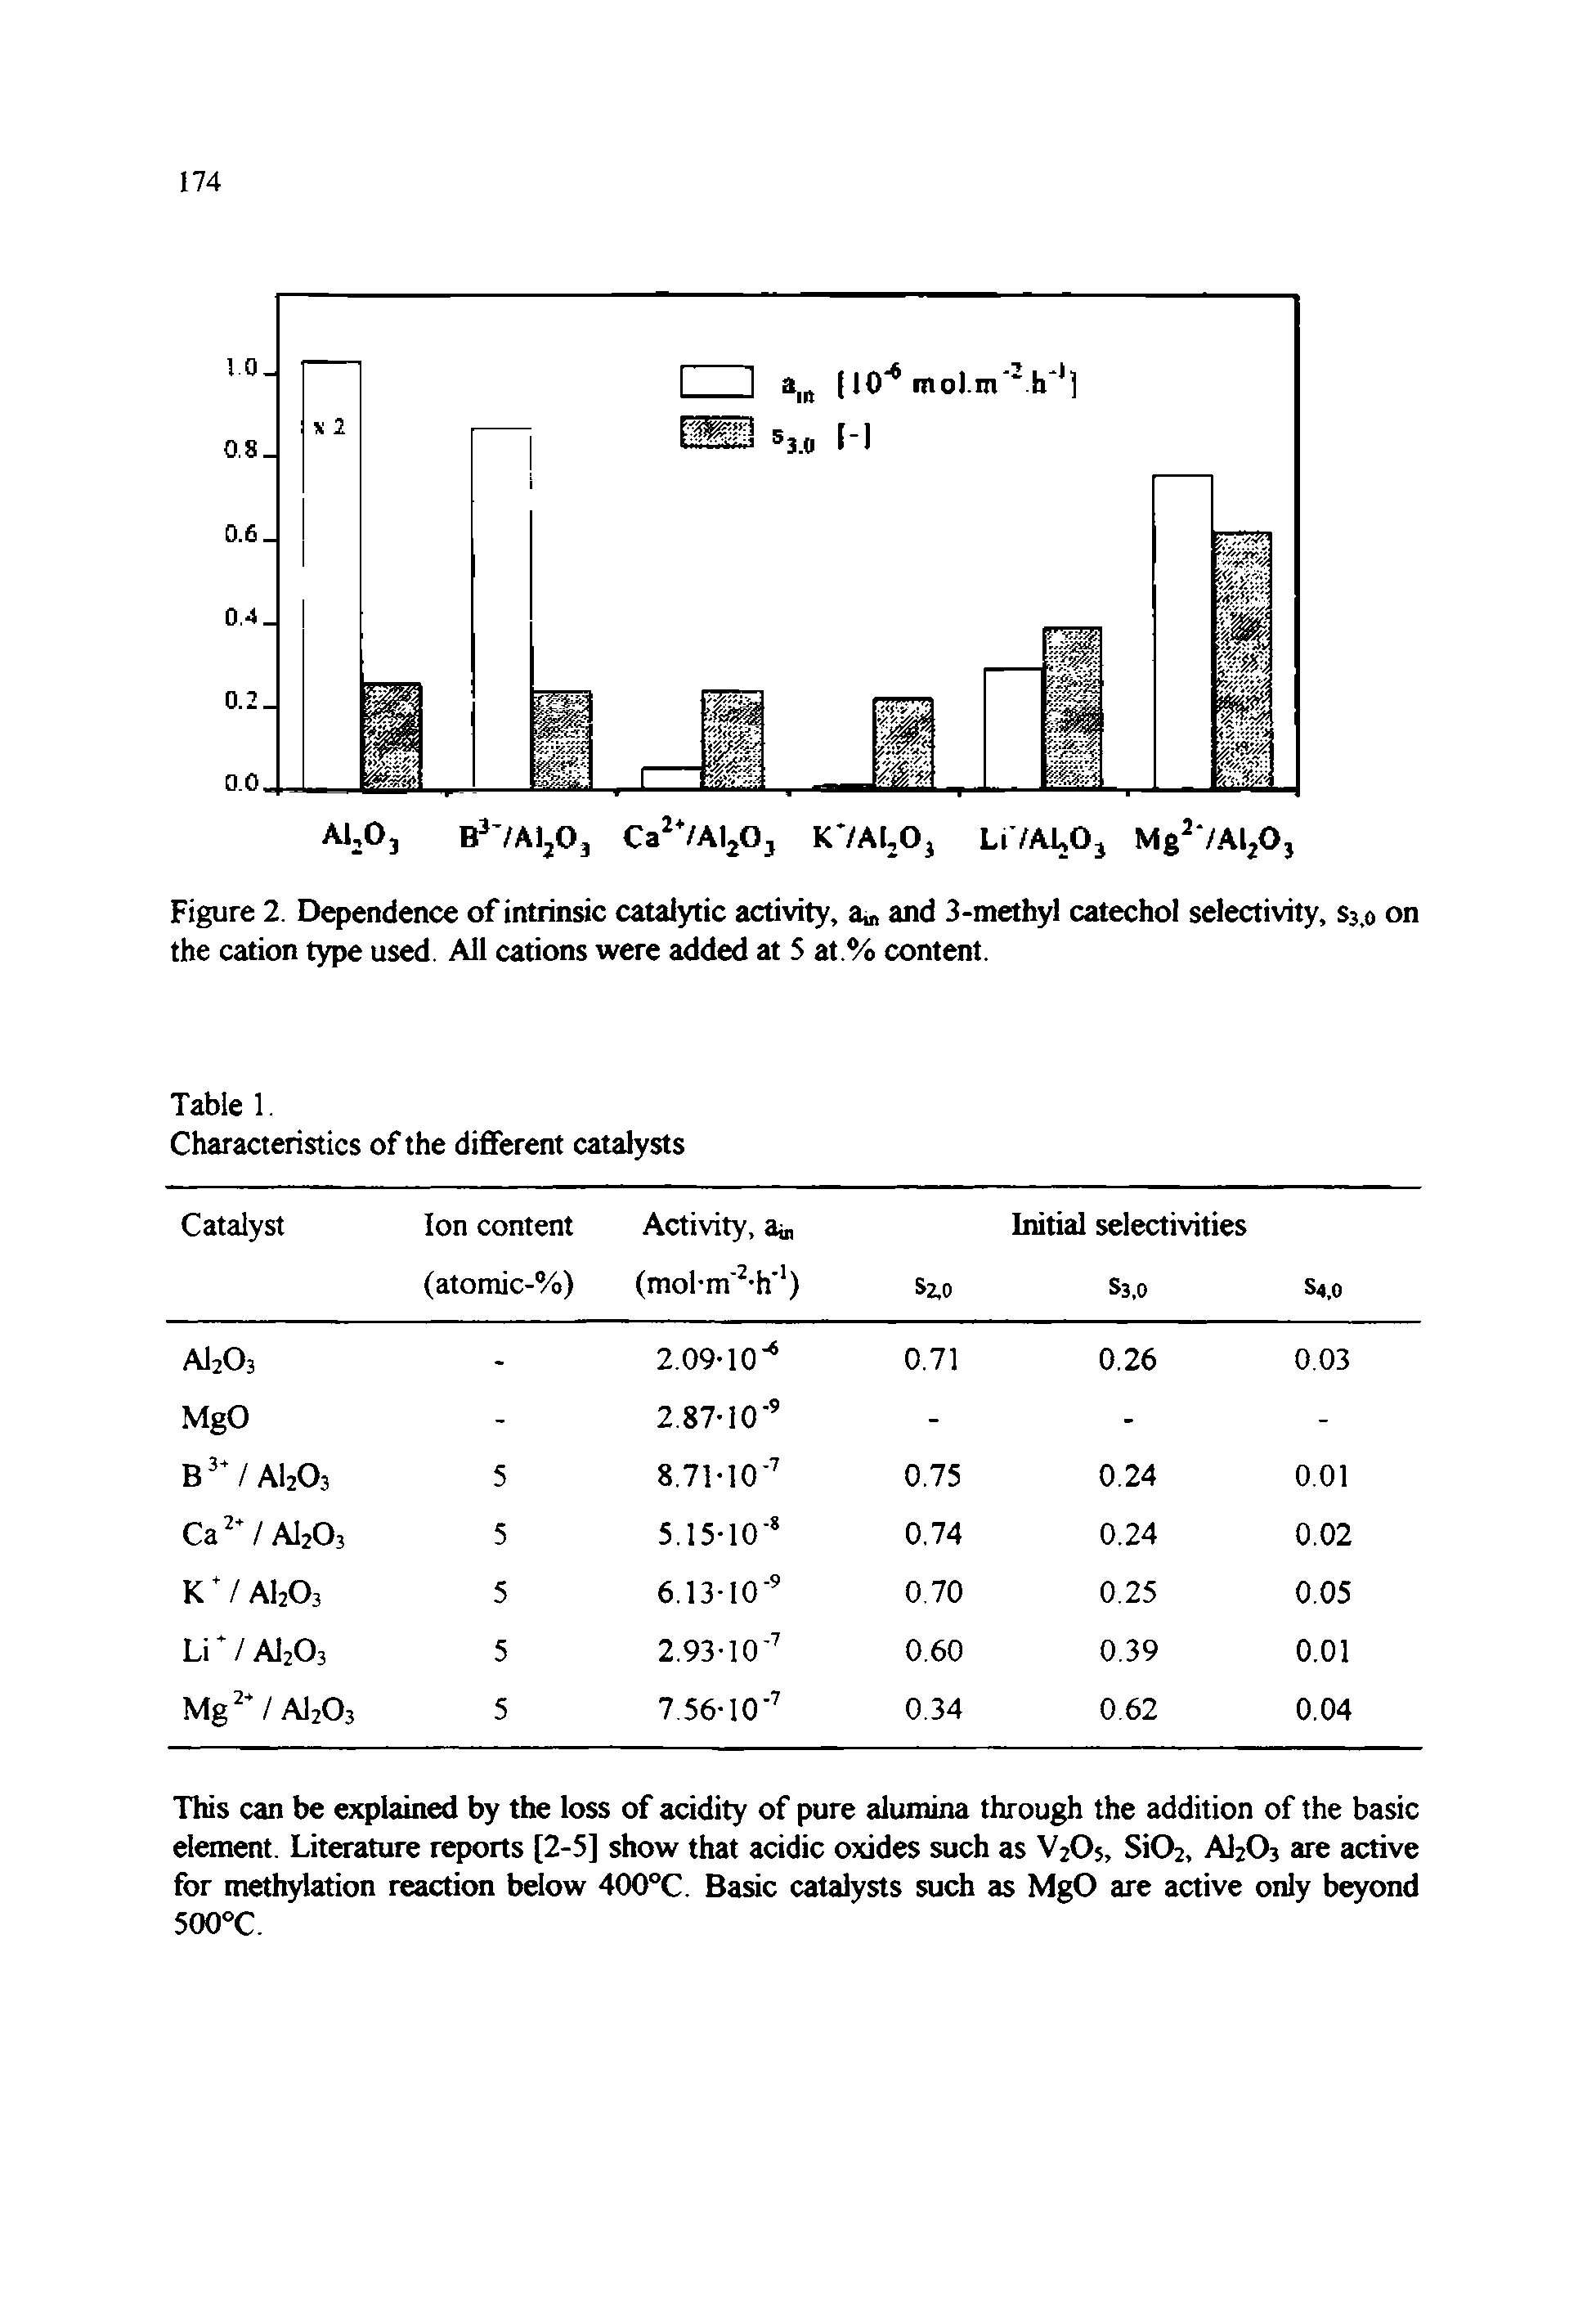 Figure 2. Dependence of intrinsic catalytic activity, au, and 3-methyl catechol selectivity, Ss,o on the cation type used All cations were added at 5 at.% content.